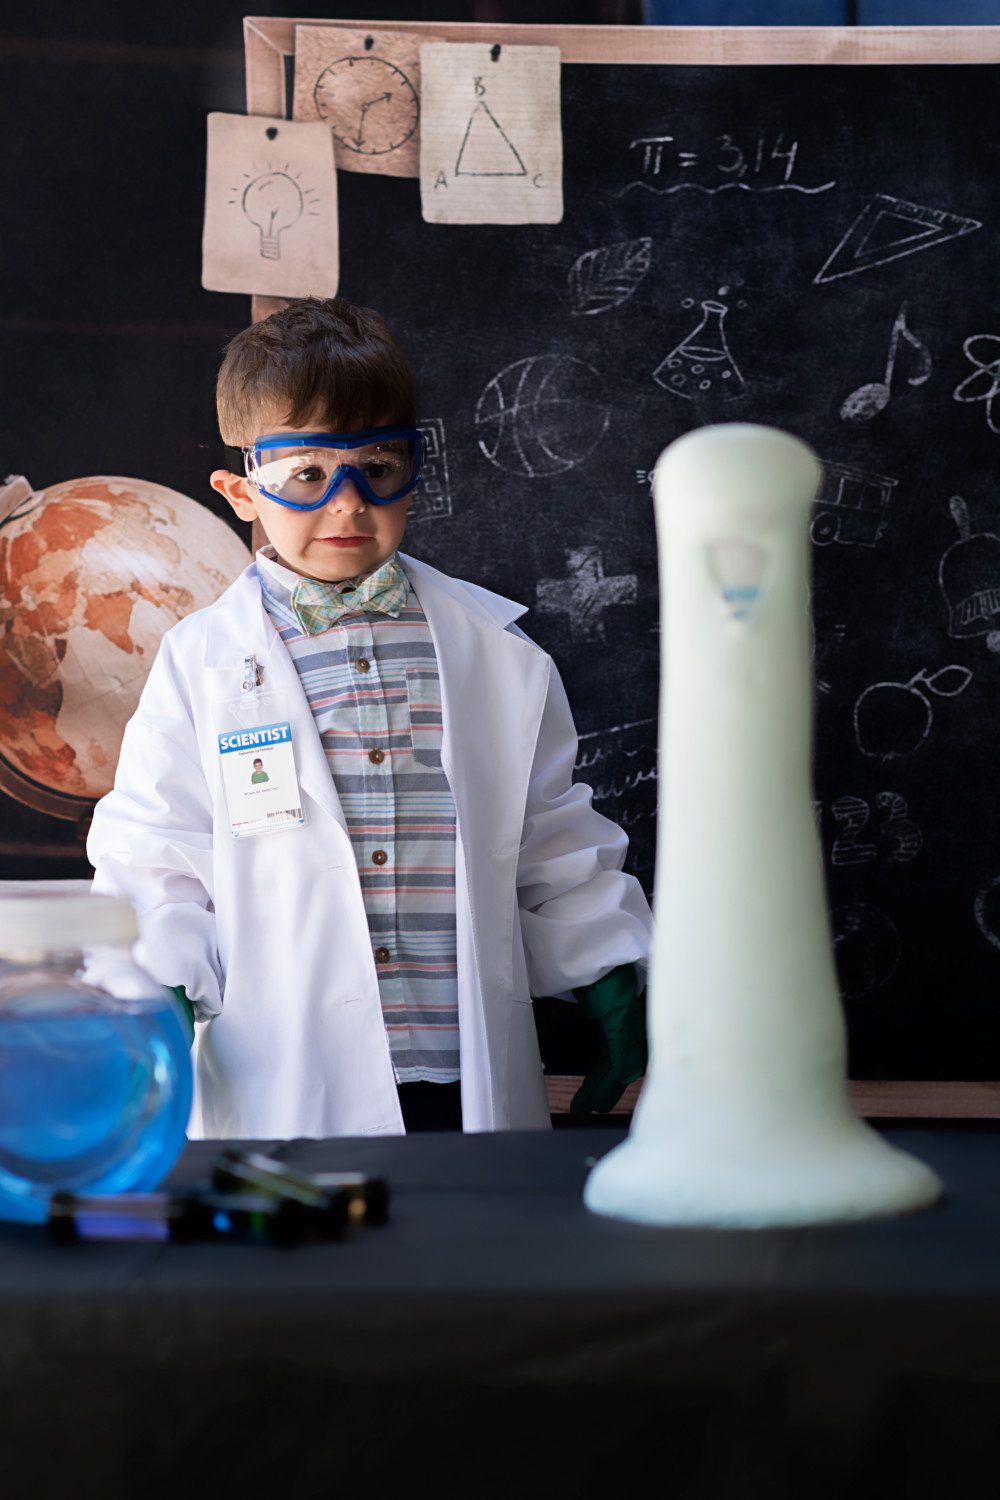 Jenn carroll photography, jenn carroll photographer, unicorn magic, storybook sessions, storybook photography, storyteller, childhood magic, young scientist, elephant toothpaste, science experiment, scientist, lab work, lab discovery, let them explore, kid science